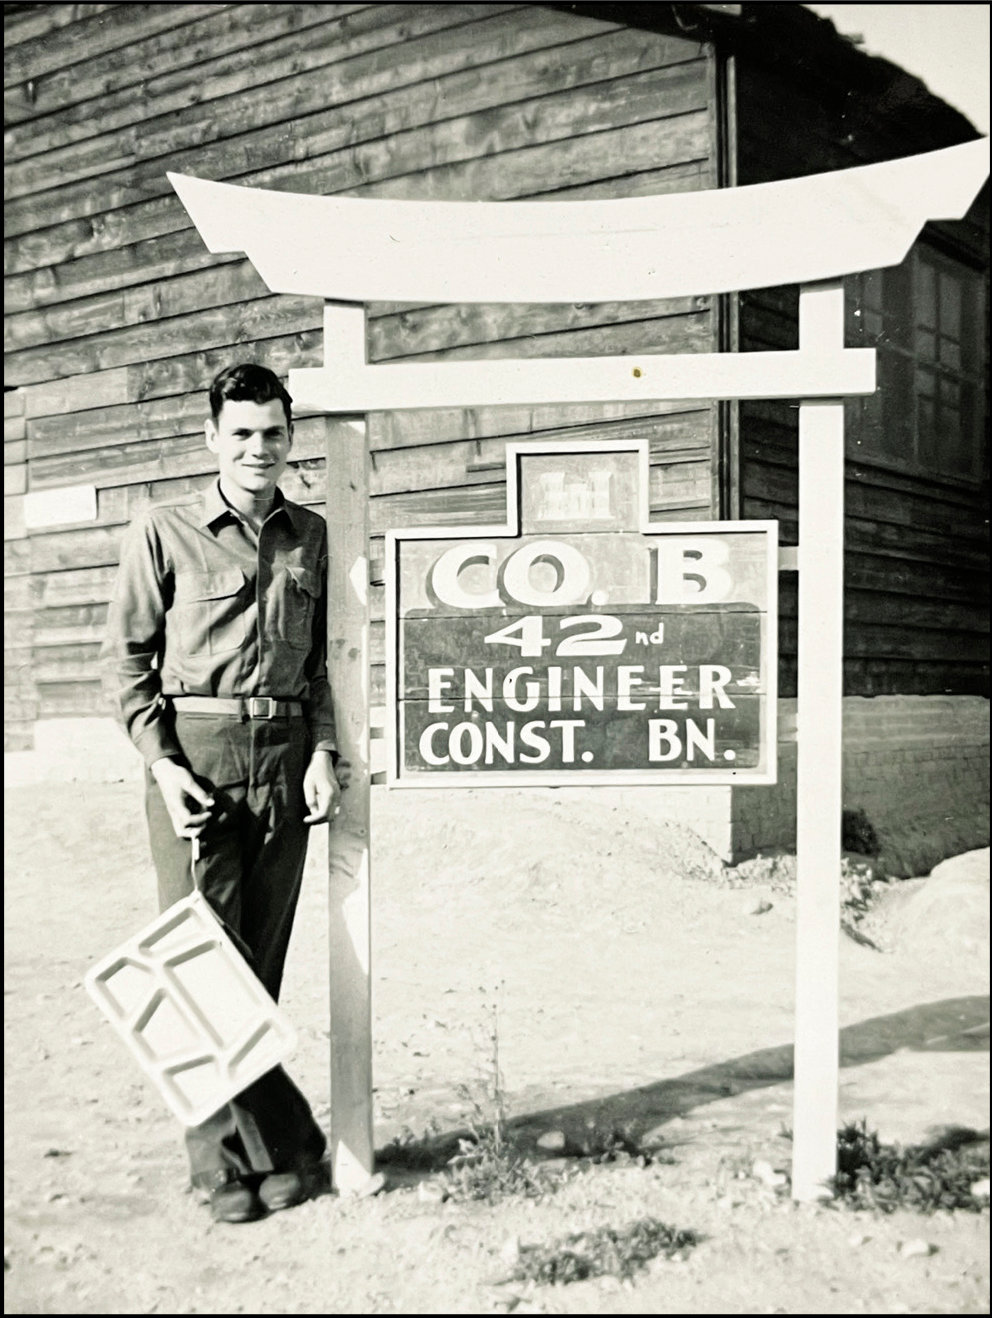 Kellye Hart, WWII veteran, stands by a sign where he was stationed in Pusan Korea. Hart served with Company B 42nd Engineer Construction Battalion.